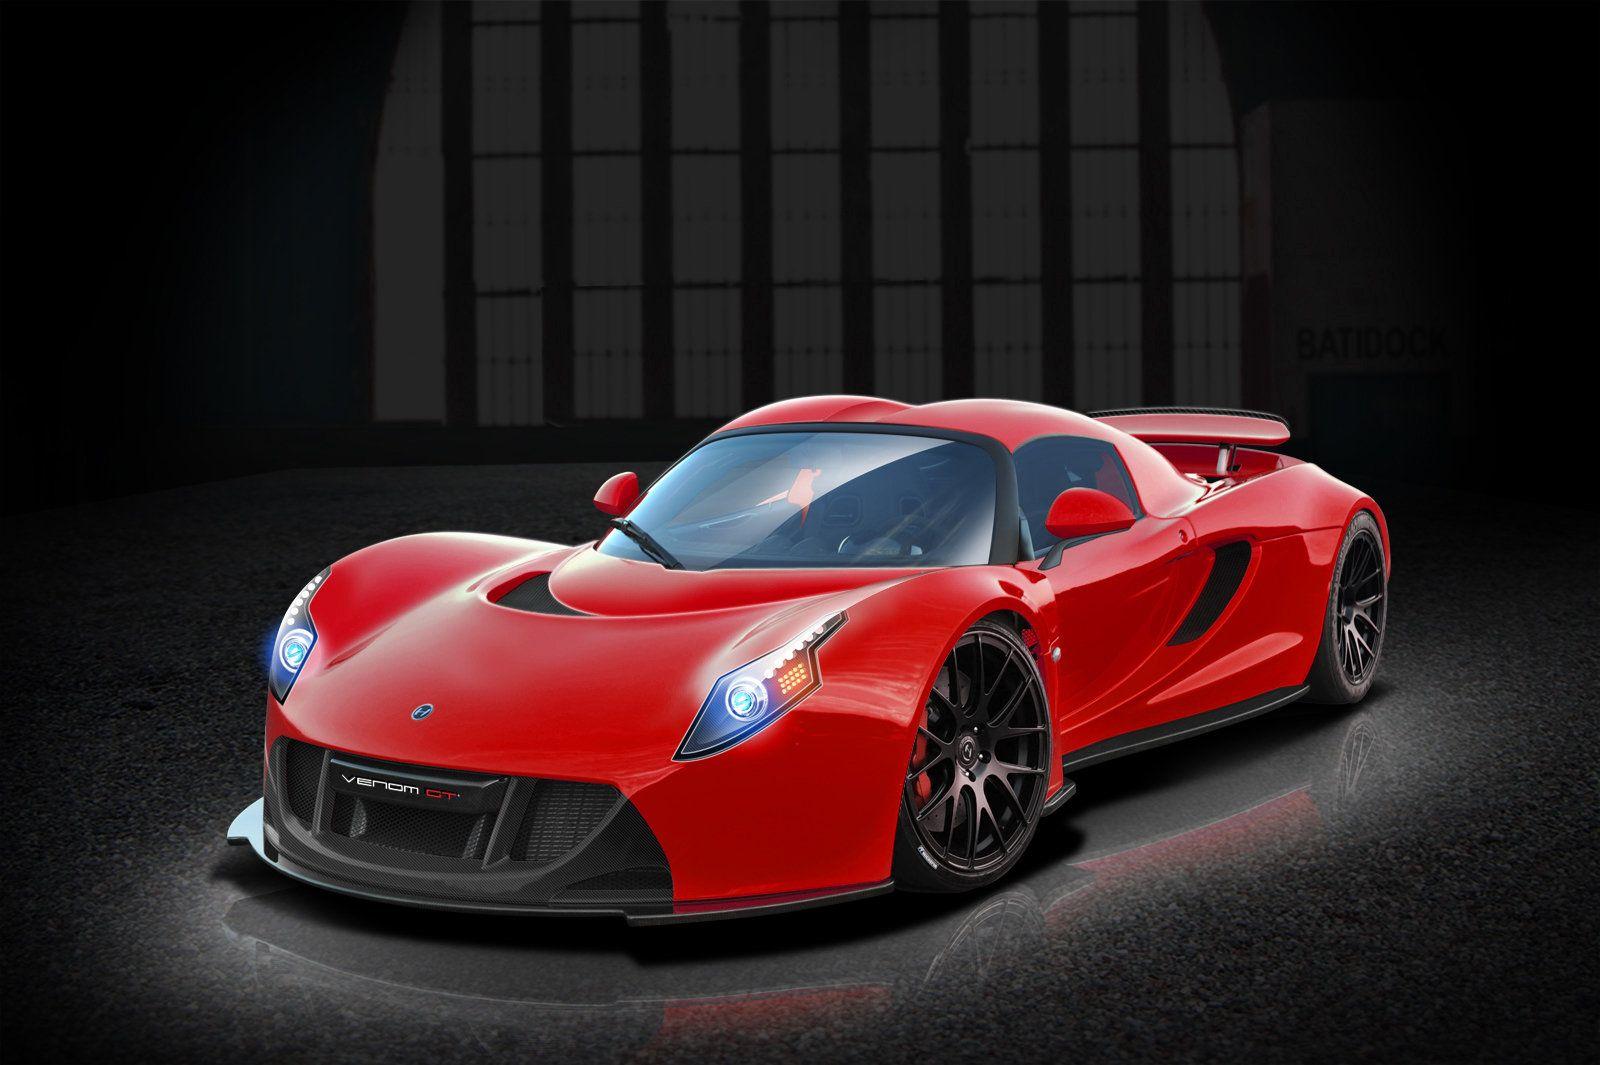 Hennessey Car Logo - Hennessey Venom Reviews, Specs, Prices, Photos And Videos | Top Speed